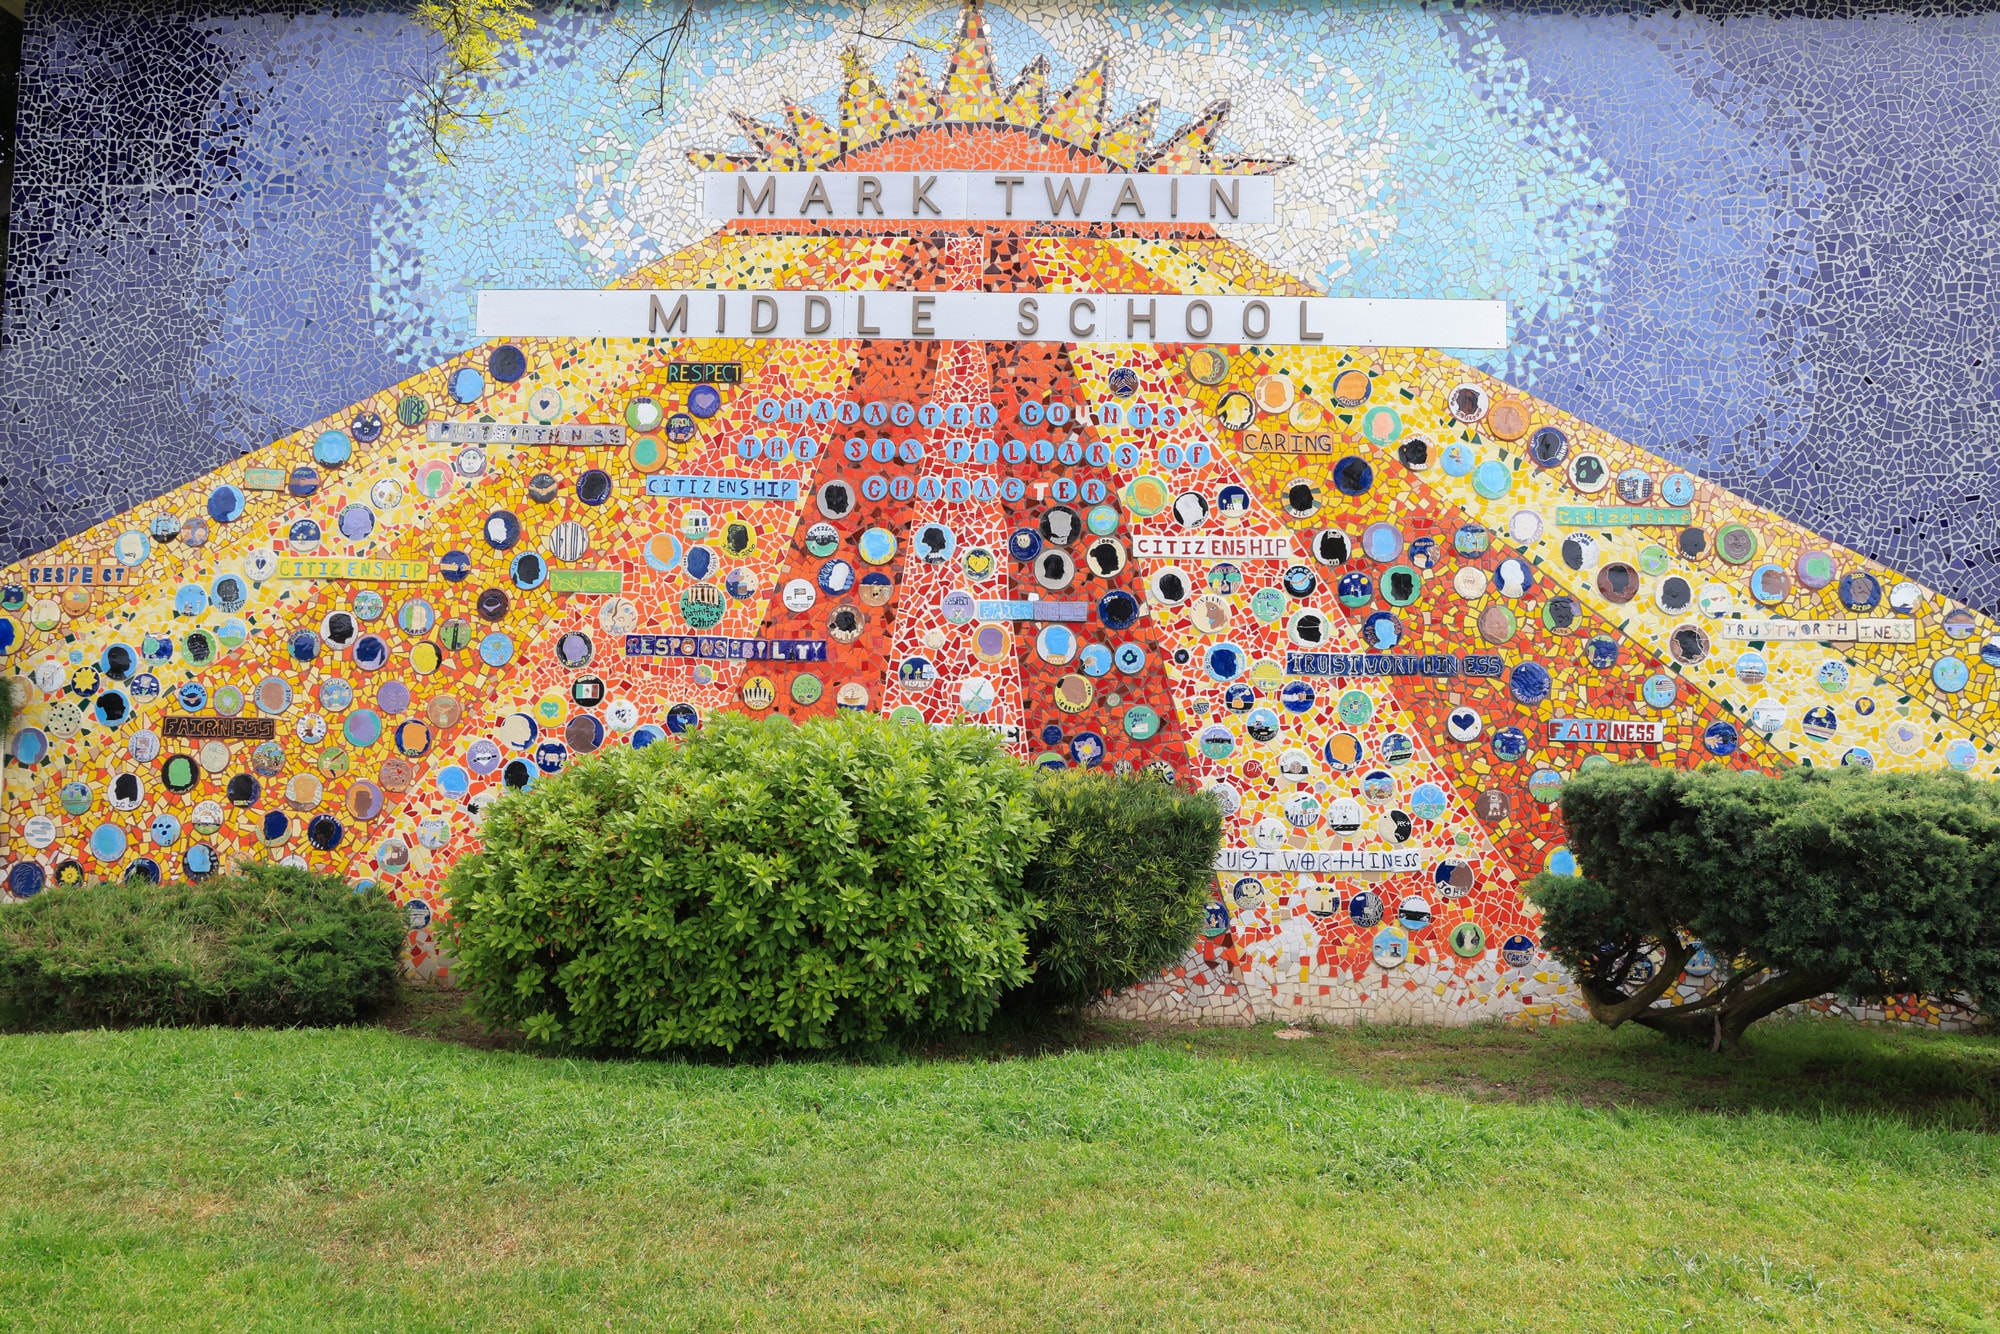 A photograph of Venice Design Series Urban Eco Tour mosaic wall at Mark Twain Middle School